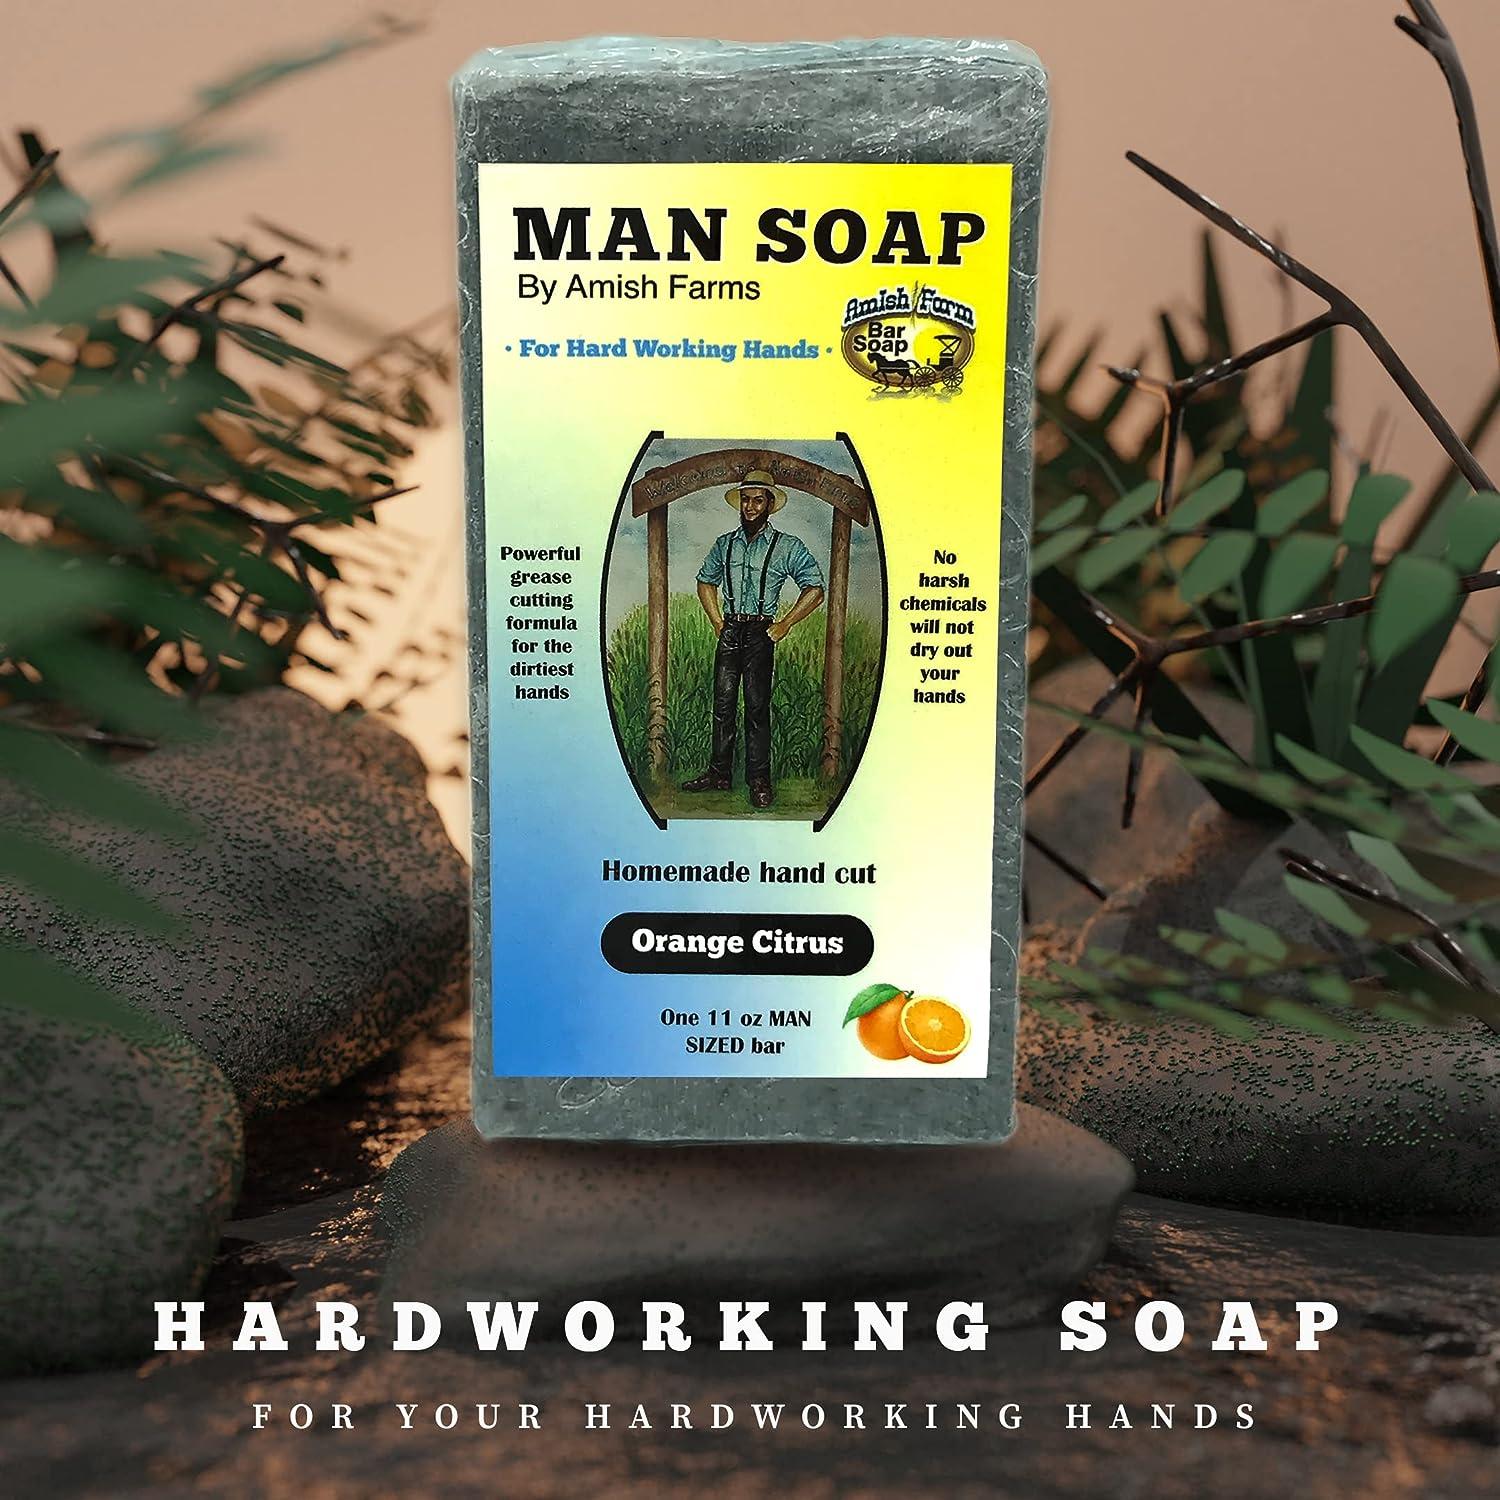 Amish Farms Man Soap for Hands - All Natural Large Bar Soap for